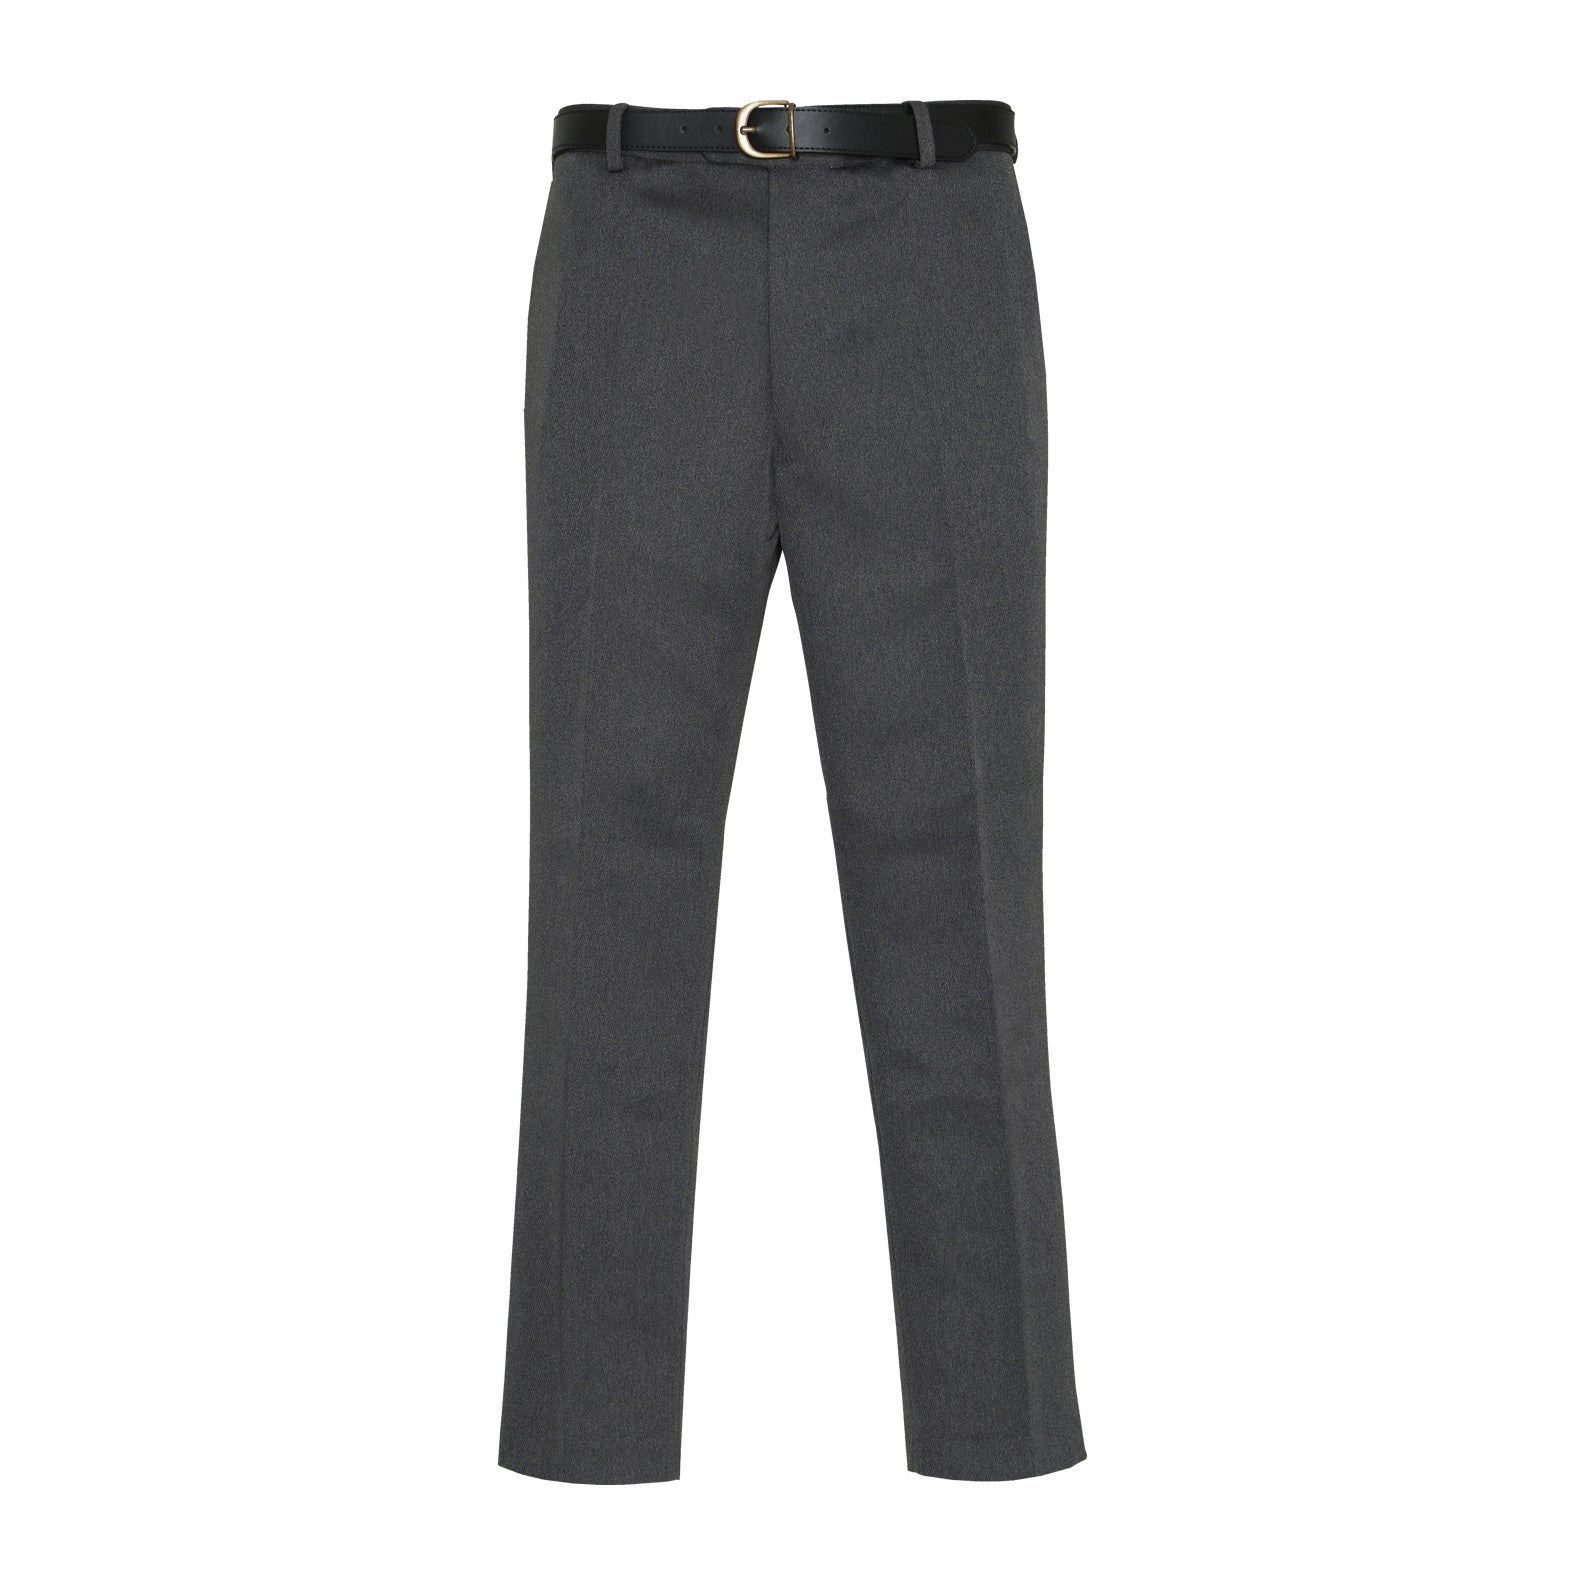 Mens Thermal Trousers- Action Style Trousers